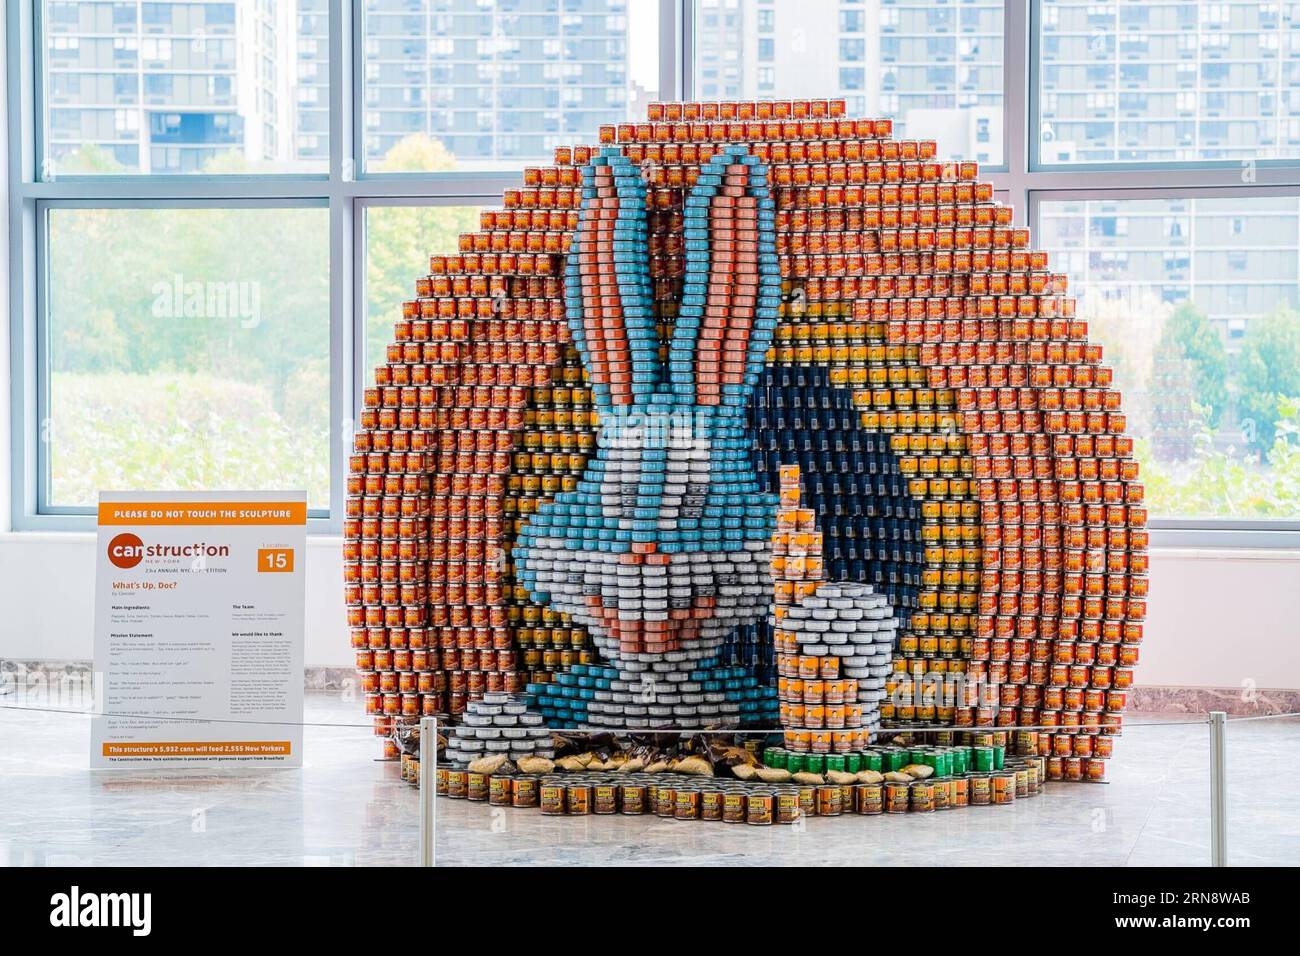 (151106) -- NEW YORK, Nov. 6, 2015 -- Cartoon character Bugs Bunny made out of food cans is displayed at the 22nd Canstruction exhibition in New York, Nov. 6, 2015. Works by winners of the 22nd Annual Canstruction International Design Competition are displayed in the Brookfield Place in downtown Manhattan. The exhibition features sculptures made entirely of unopened canned food. More than 1,200 local winners from 125 cities around the world participated in the competition. The canned food used in the exhibition will be donated to a local food bank responsible for feeding more than one million Stock Photo